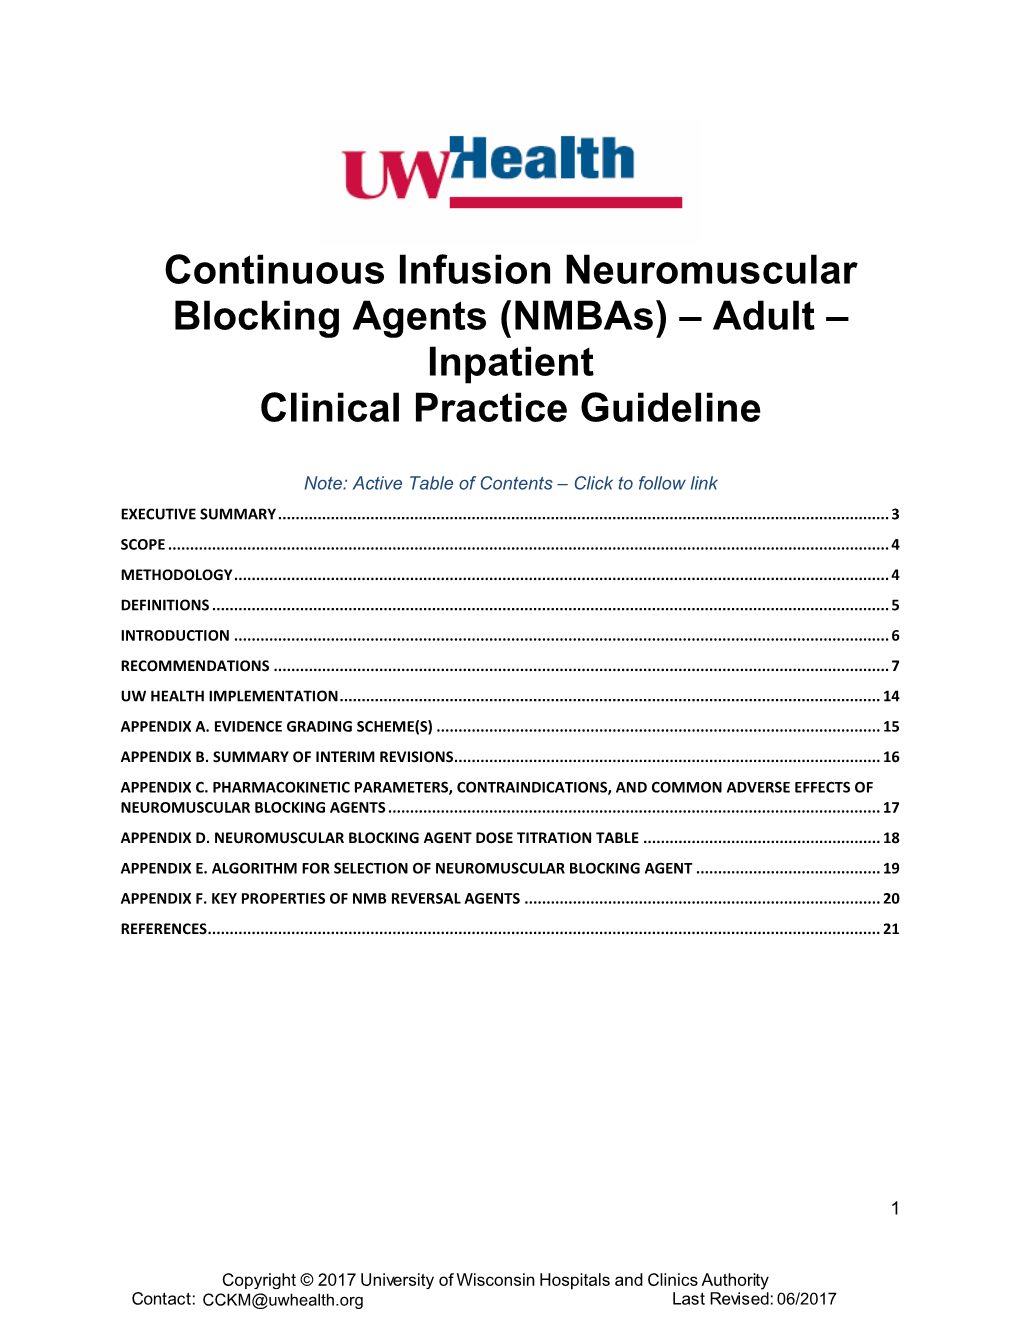 Continuous Infusion Neuromuscular Blocking Agents (Nmbas) – Adult – Inpatient Clinical Practice Guideline